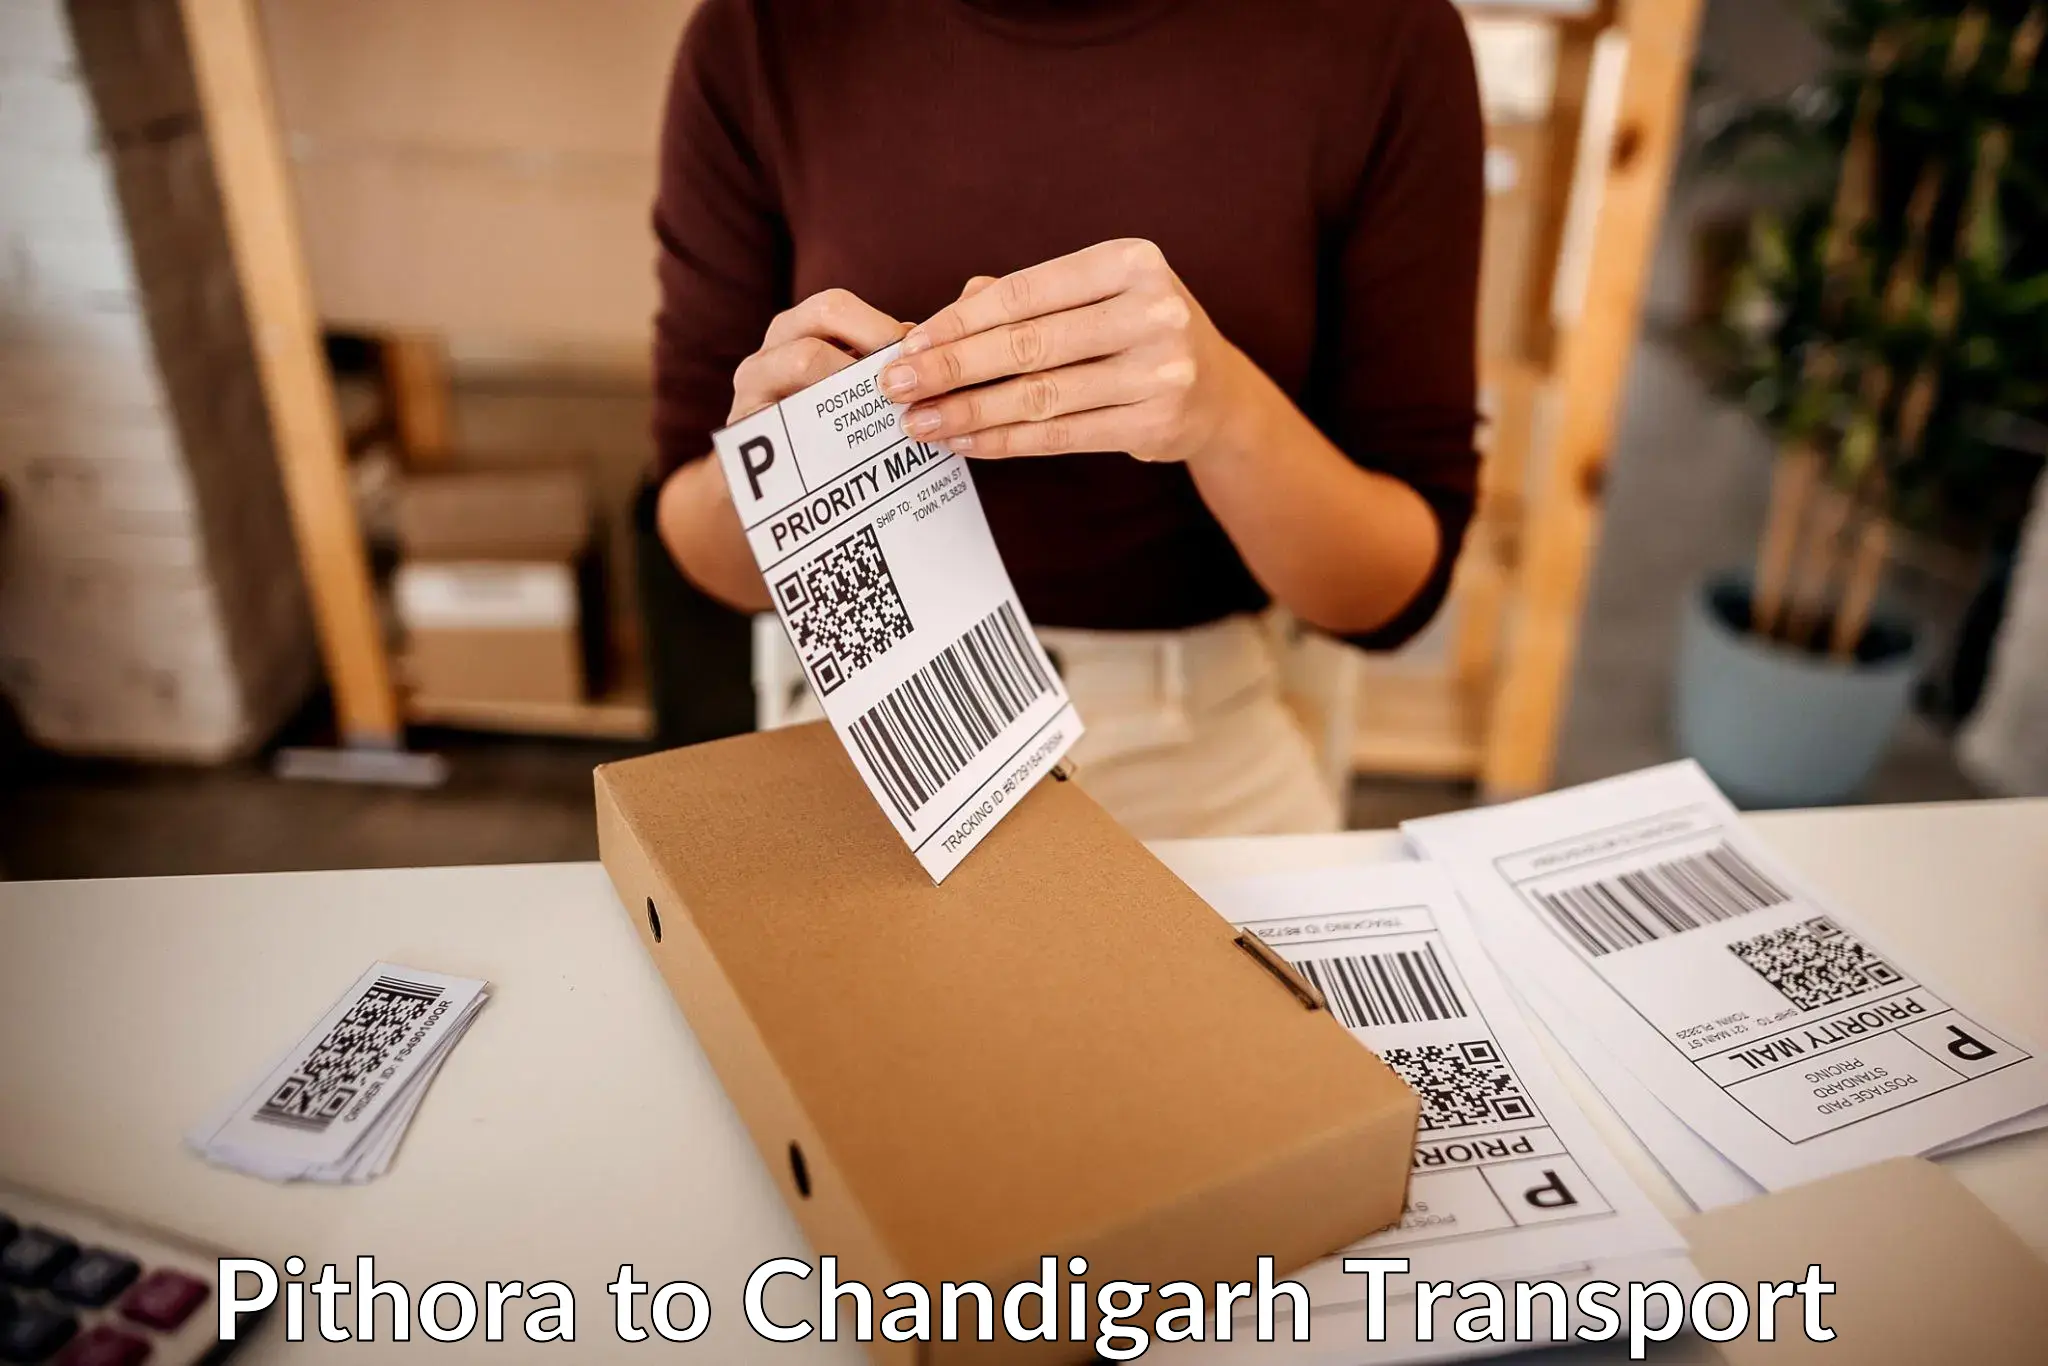 Air freight transport services Pithora to Chandigarh